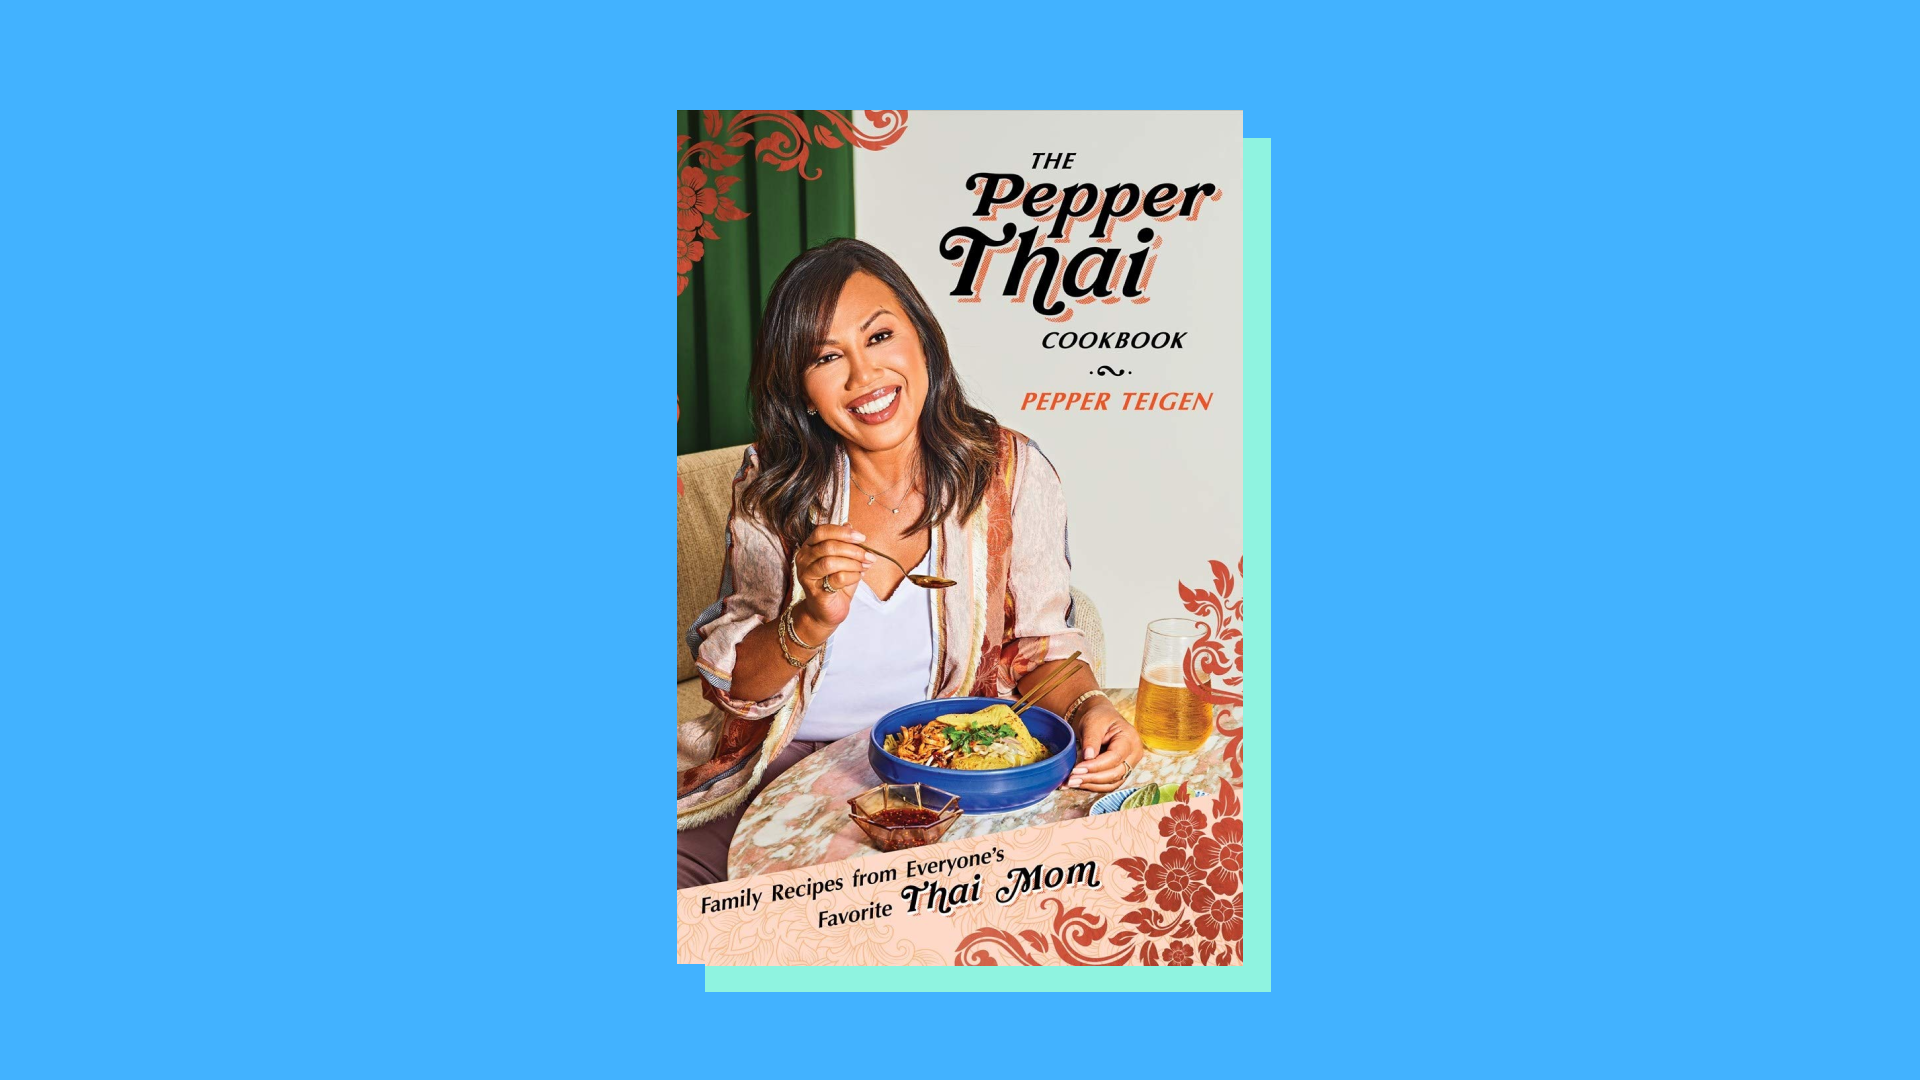 “The Pepper Thai Cookbook: Family Recipes from Everyone's Favorite Thai Mom” by Pepper Teigen and Garrett Snyder 